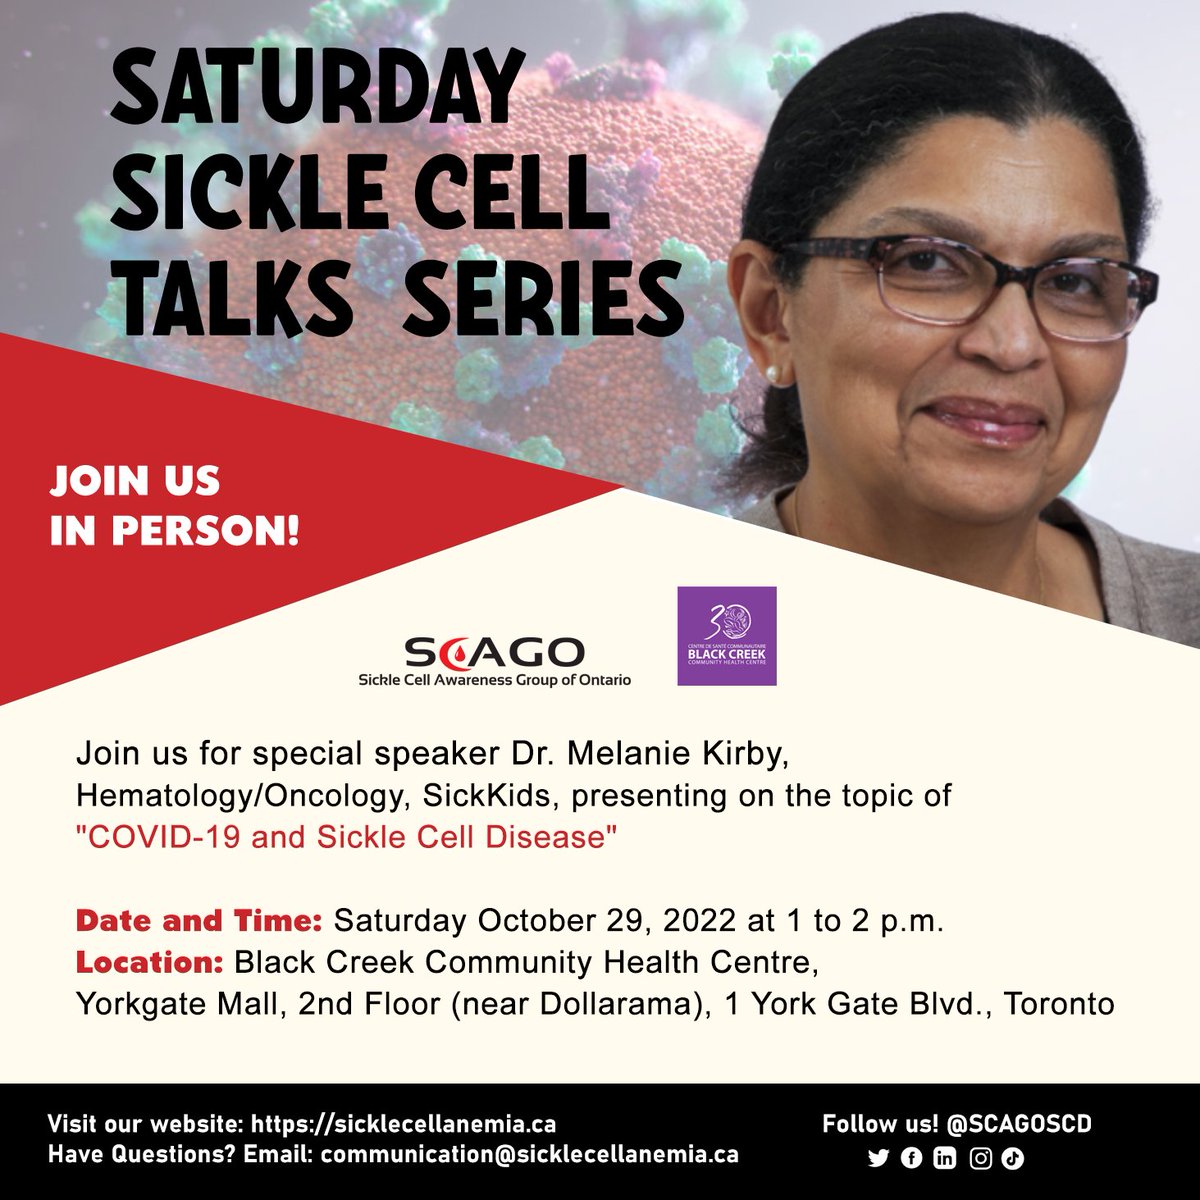 Partnering with @SCAGO, Black Creek CHC presents “COVID-19 & Sickle Cell Disease” Dr. Melanie Kirby, Hematology/Oncology, SickKids on Saturday October 29th from 1 to 2 PM. Yorkgate Mall, 2nd Floor (beside Dollarama) 20-minute Q&A session following the presentation.